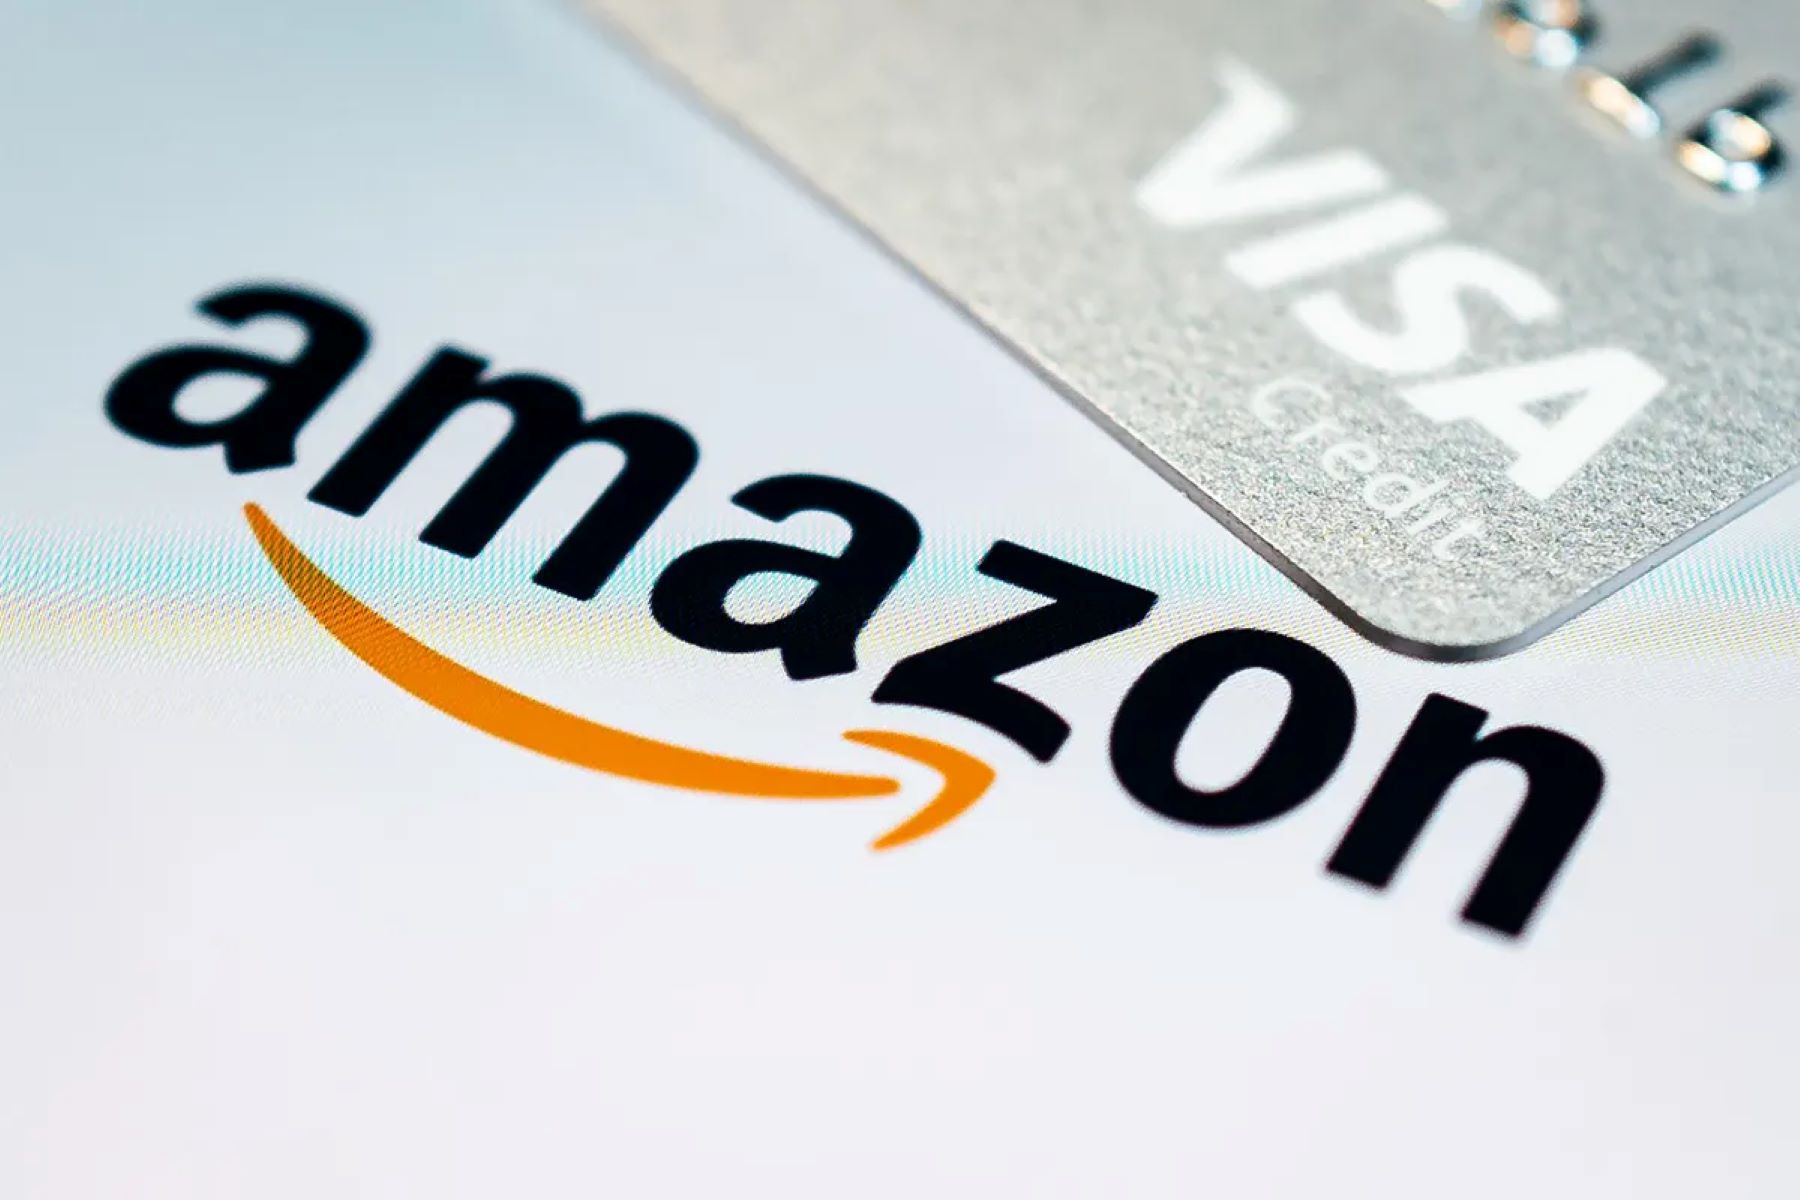 How To Take Credit Card Off Amazon